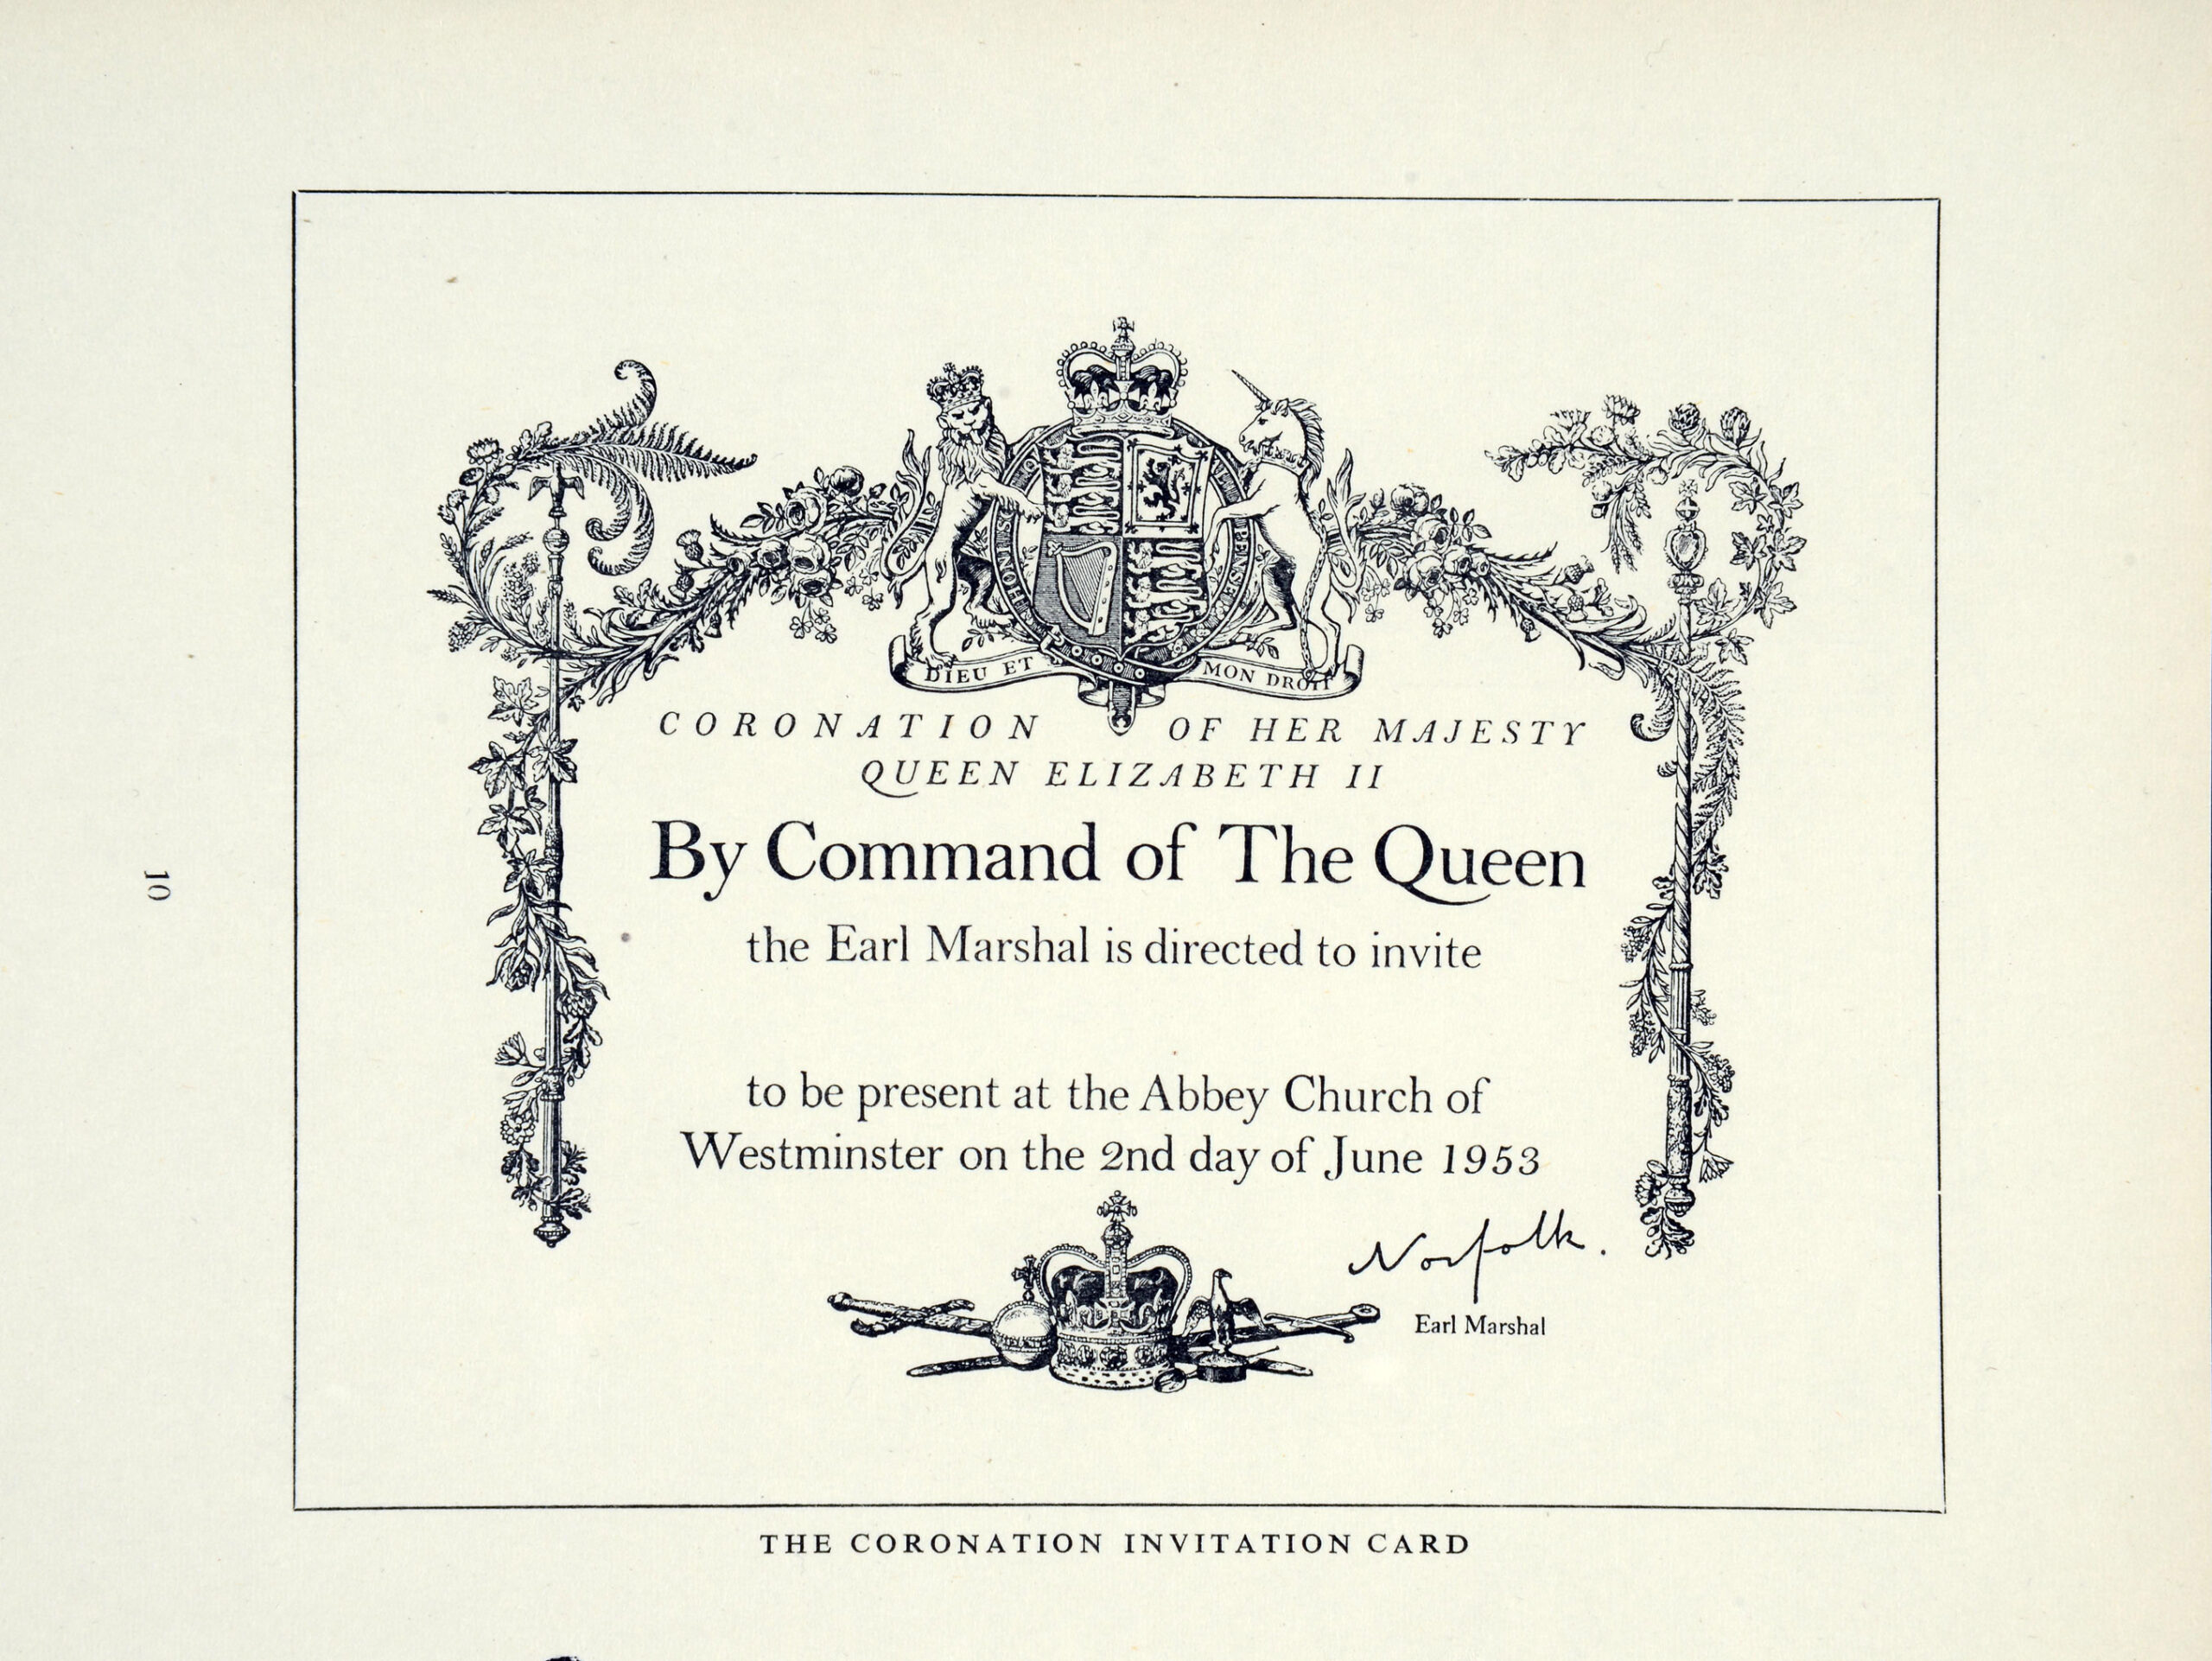 Example invitation to the Queen's coronation